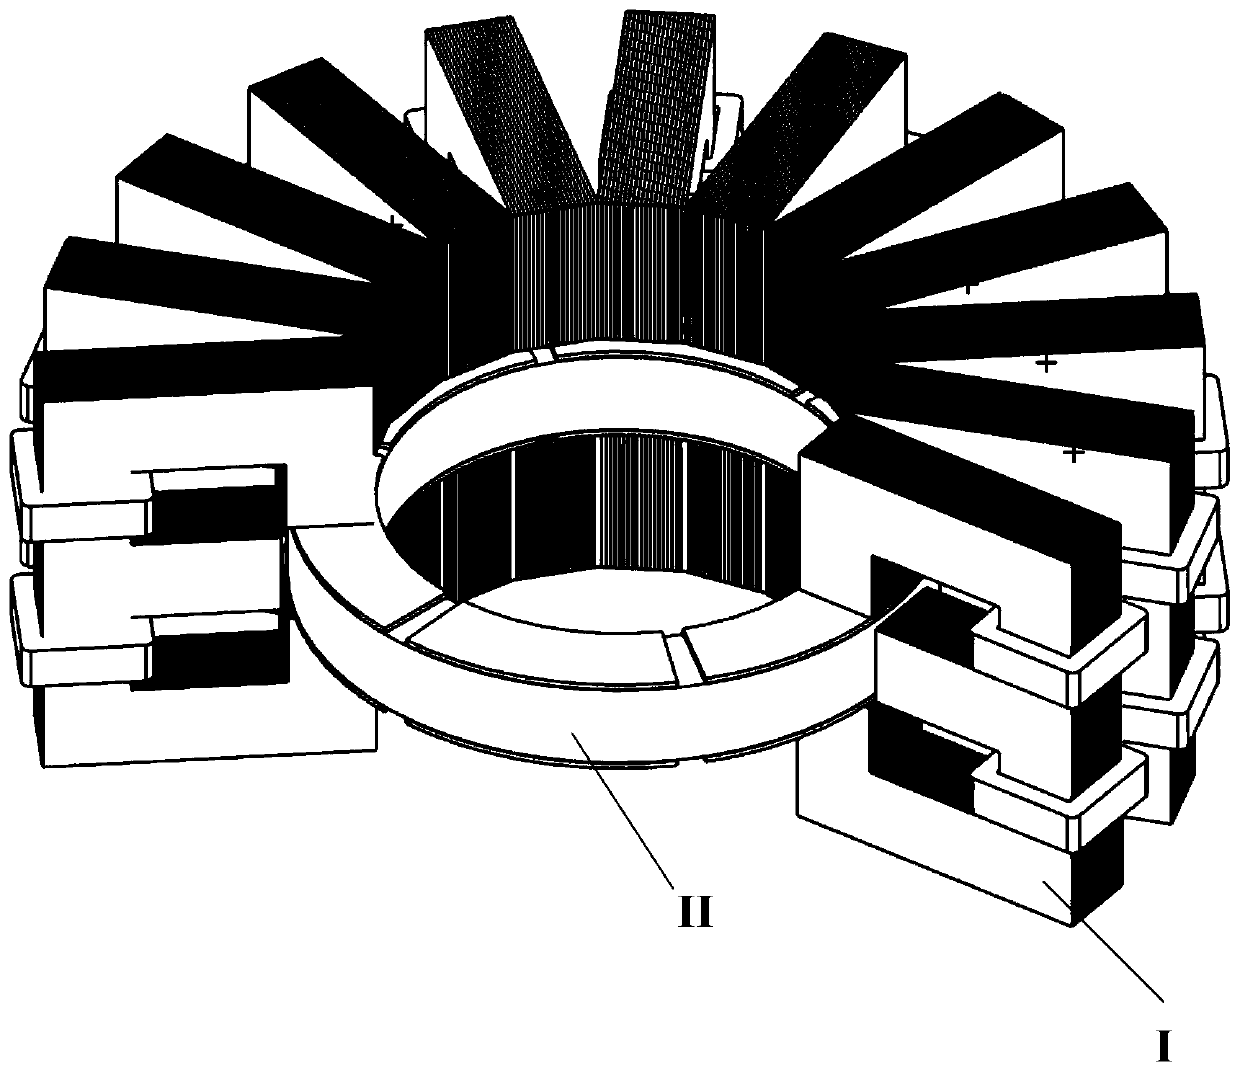 E-type double-winding stator axial flux motor made of amorphous material